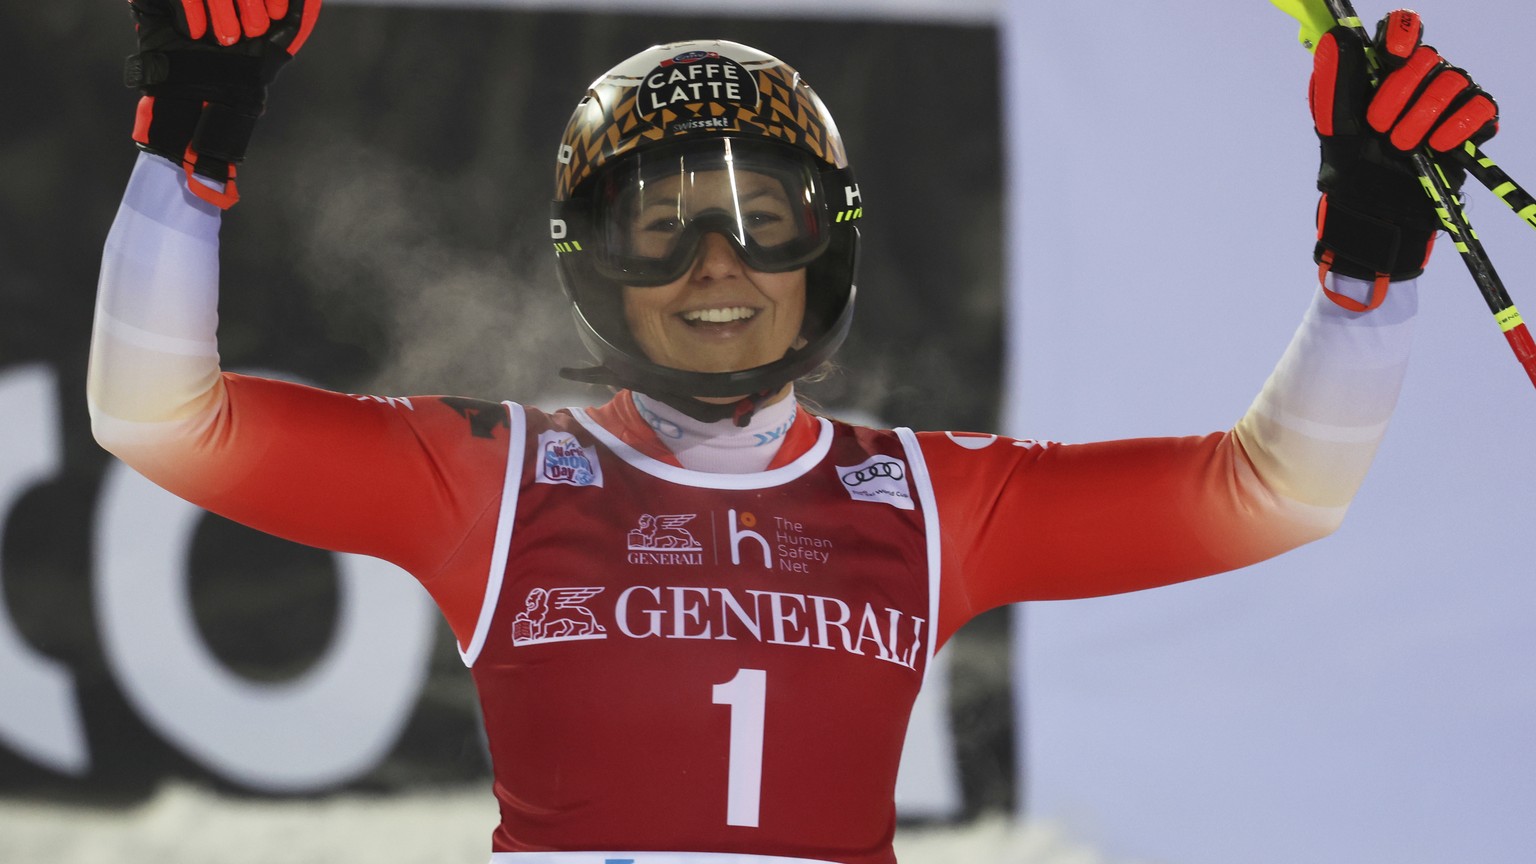 Switzerland's Wendy Holdener reacts after completing an alpine ski, women's World Cup slalom, in Levi, Finland, Sunday, Nov. 20, 2022. (AP Photo/Alessandro Trovati)